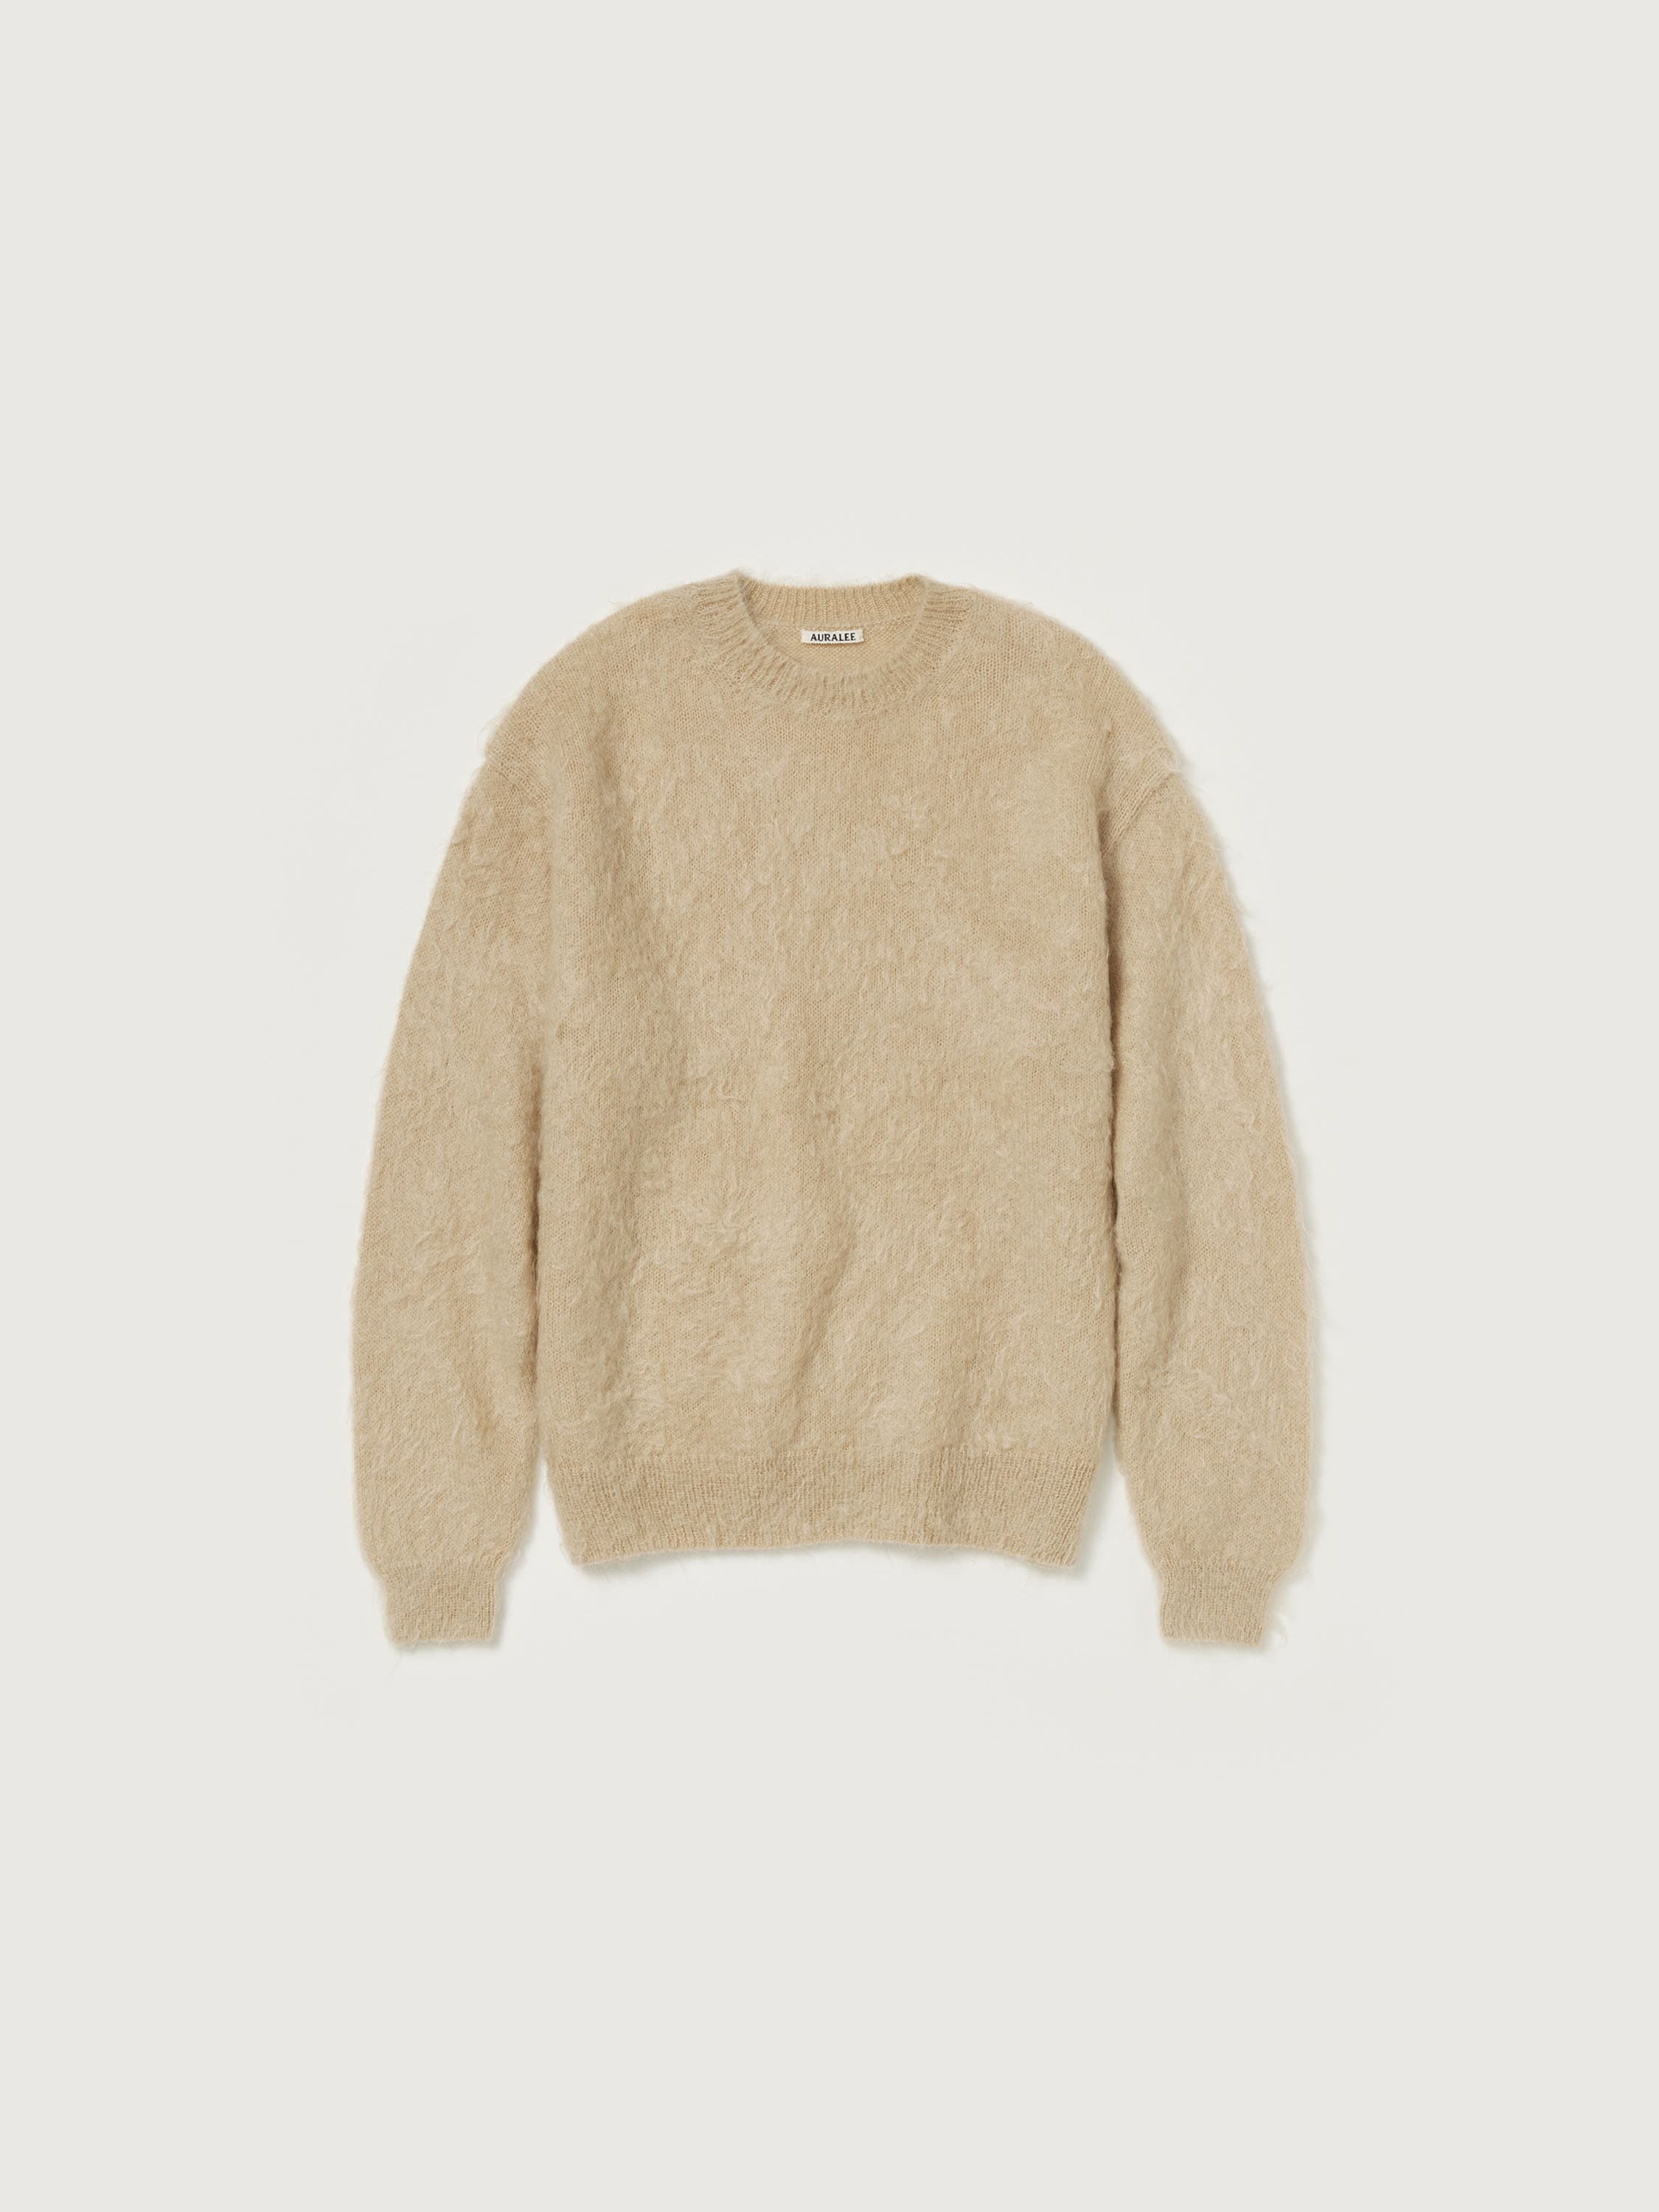 BRUSHED SUPER KID MOHAIR KNIT P/O 詳細画像 BEIGE 4